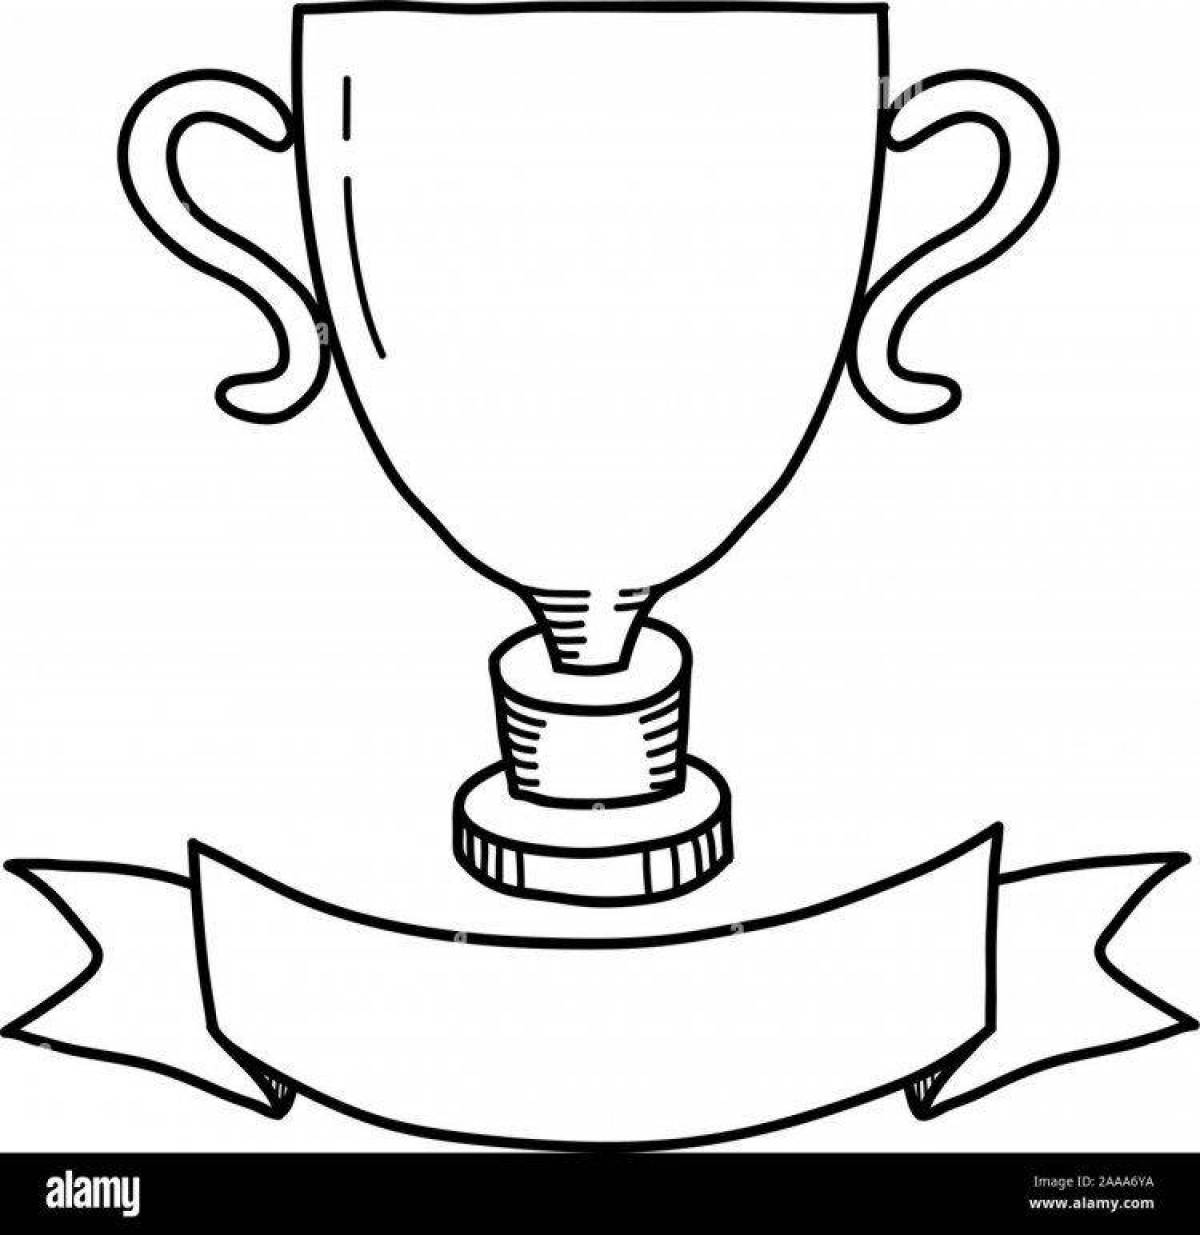 Coloring page deluxe winner cup